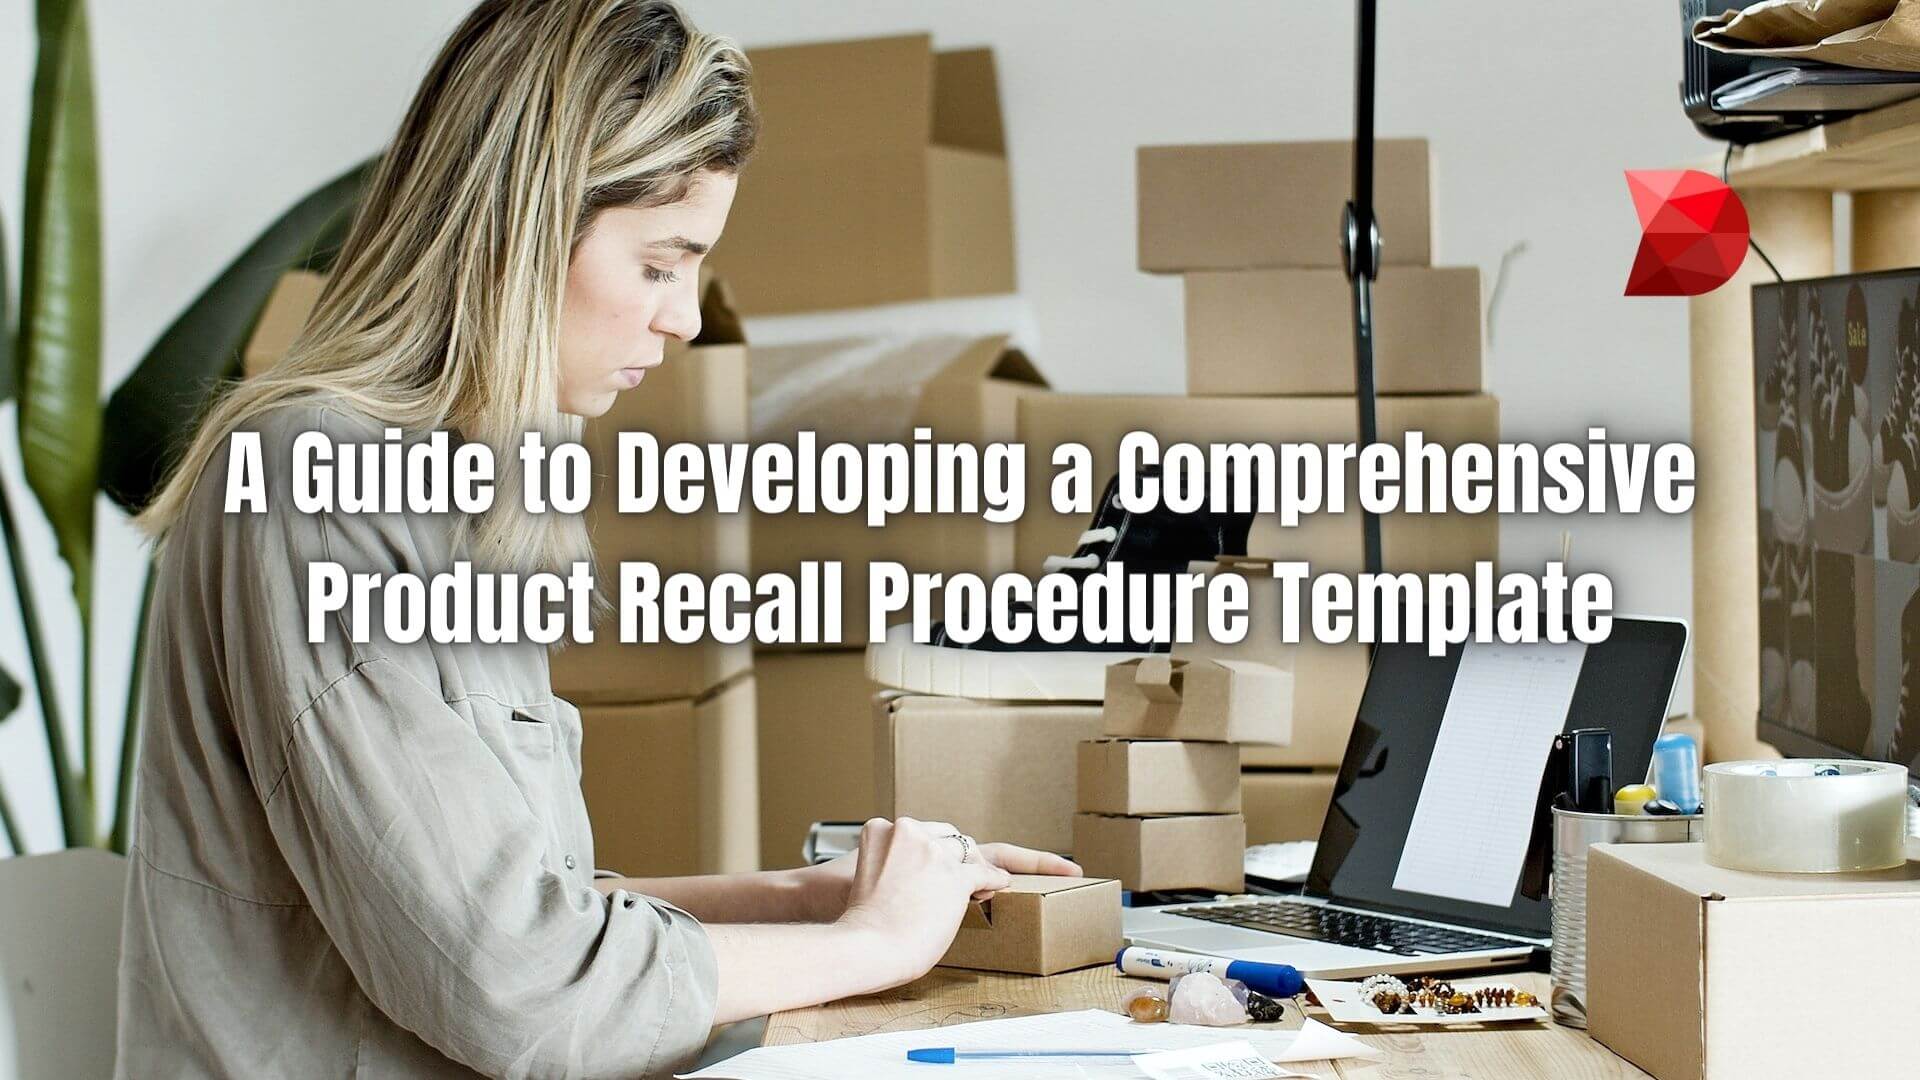 A product recall procedure template is a pre-planned strategy manufacturers use to effectively manage product recalls. Learn more!